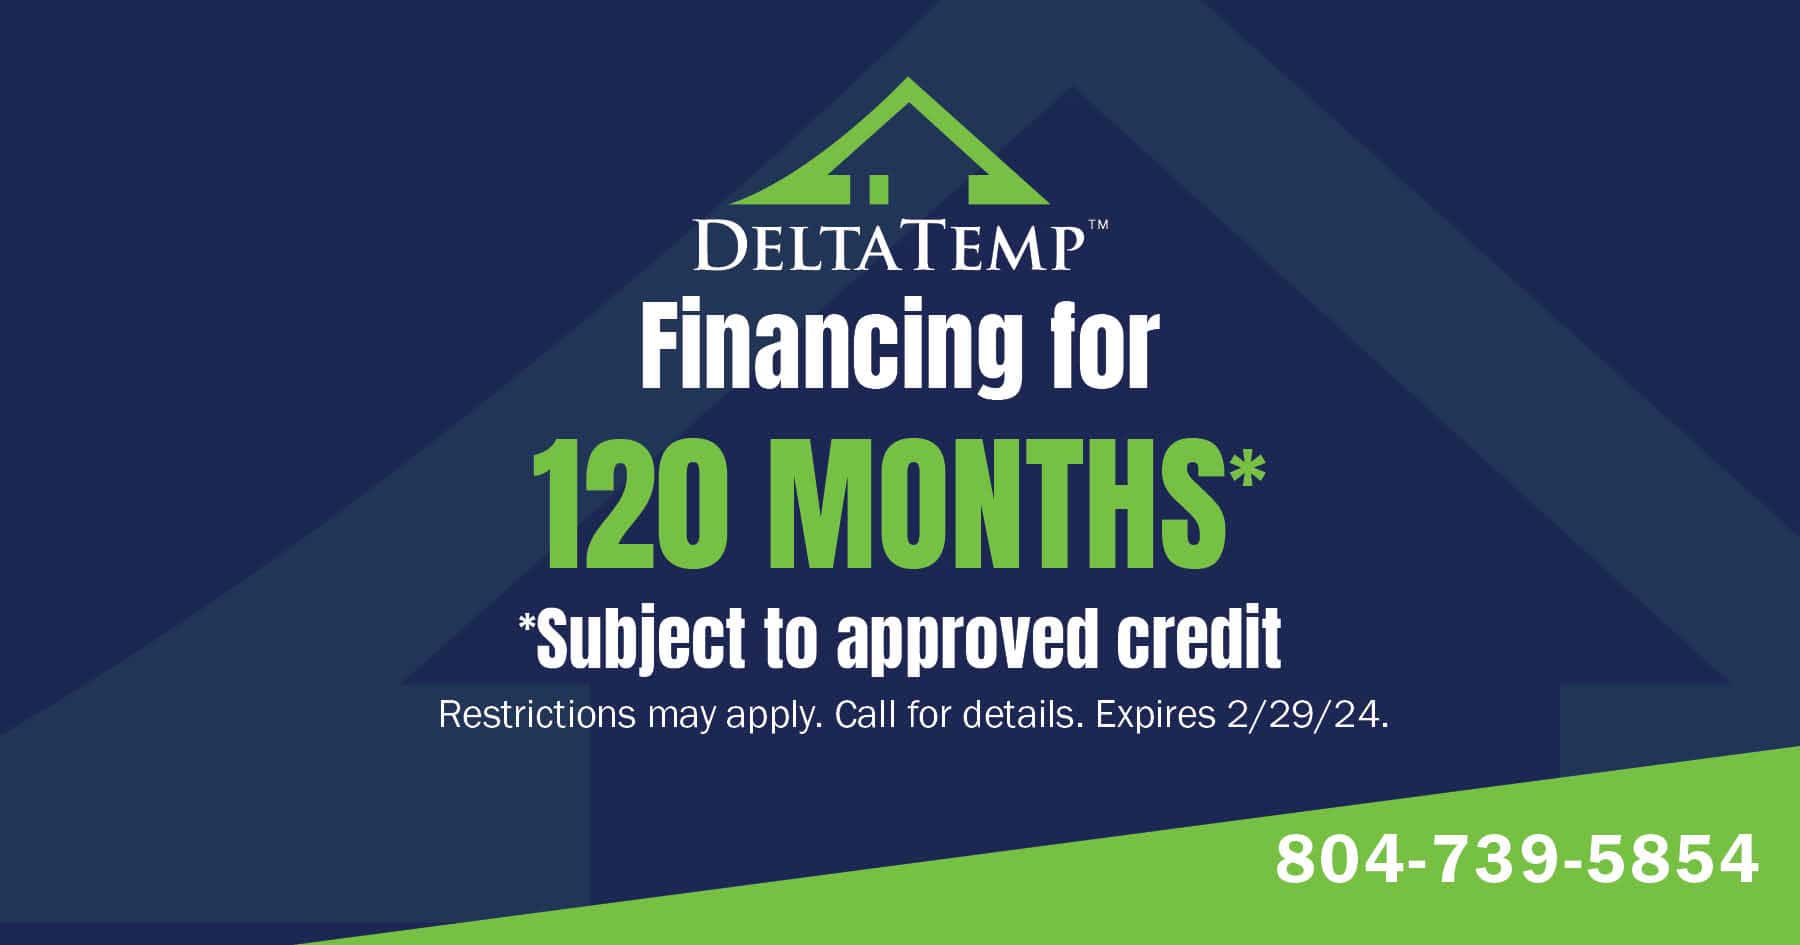 Financing for 120 months. Subject to approved credit. Restrictions may apply. Call for details. Expires 2/29/2024.